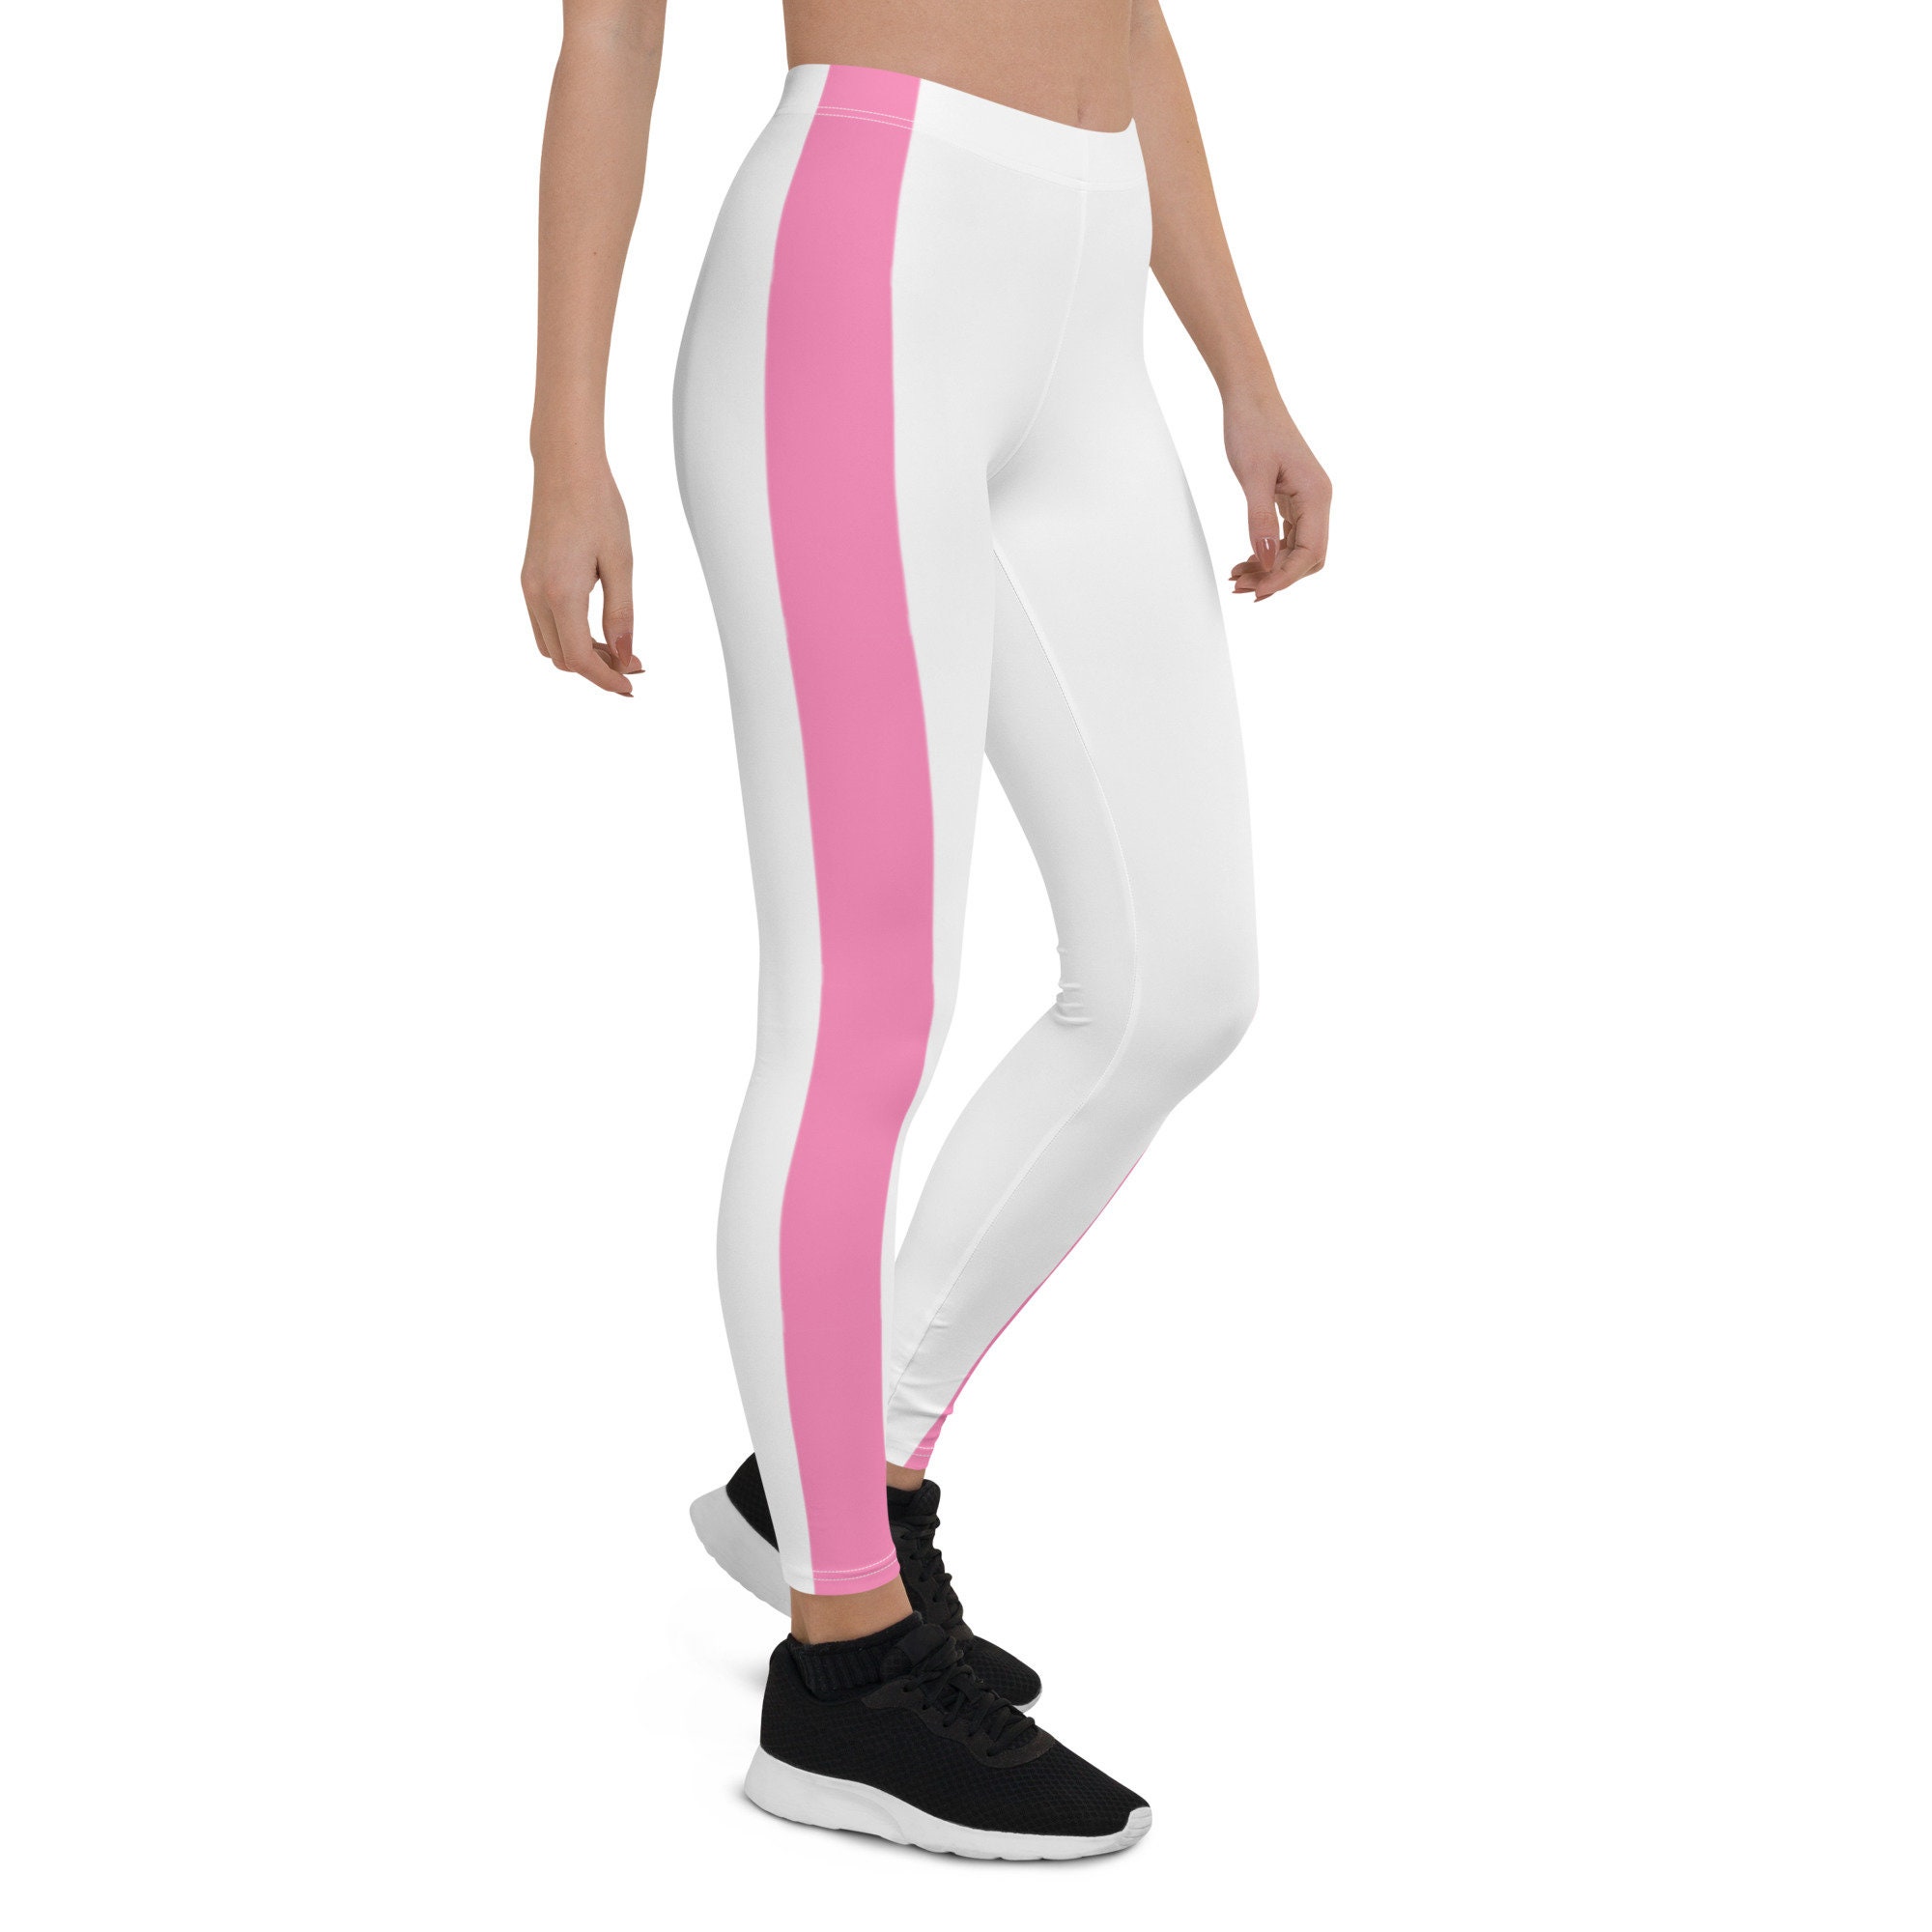 Princess Peach Leggings the Perfect Addition to Your Royal Wardrobe -   New Zealand